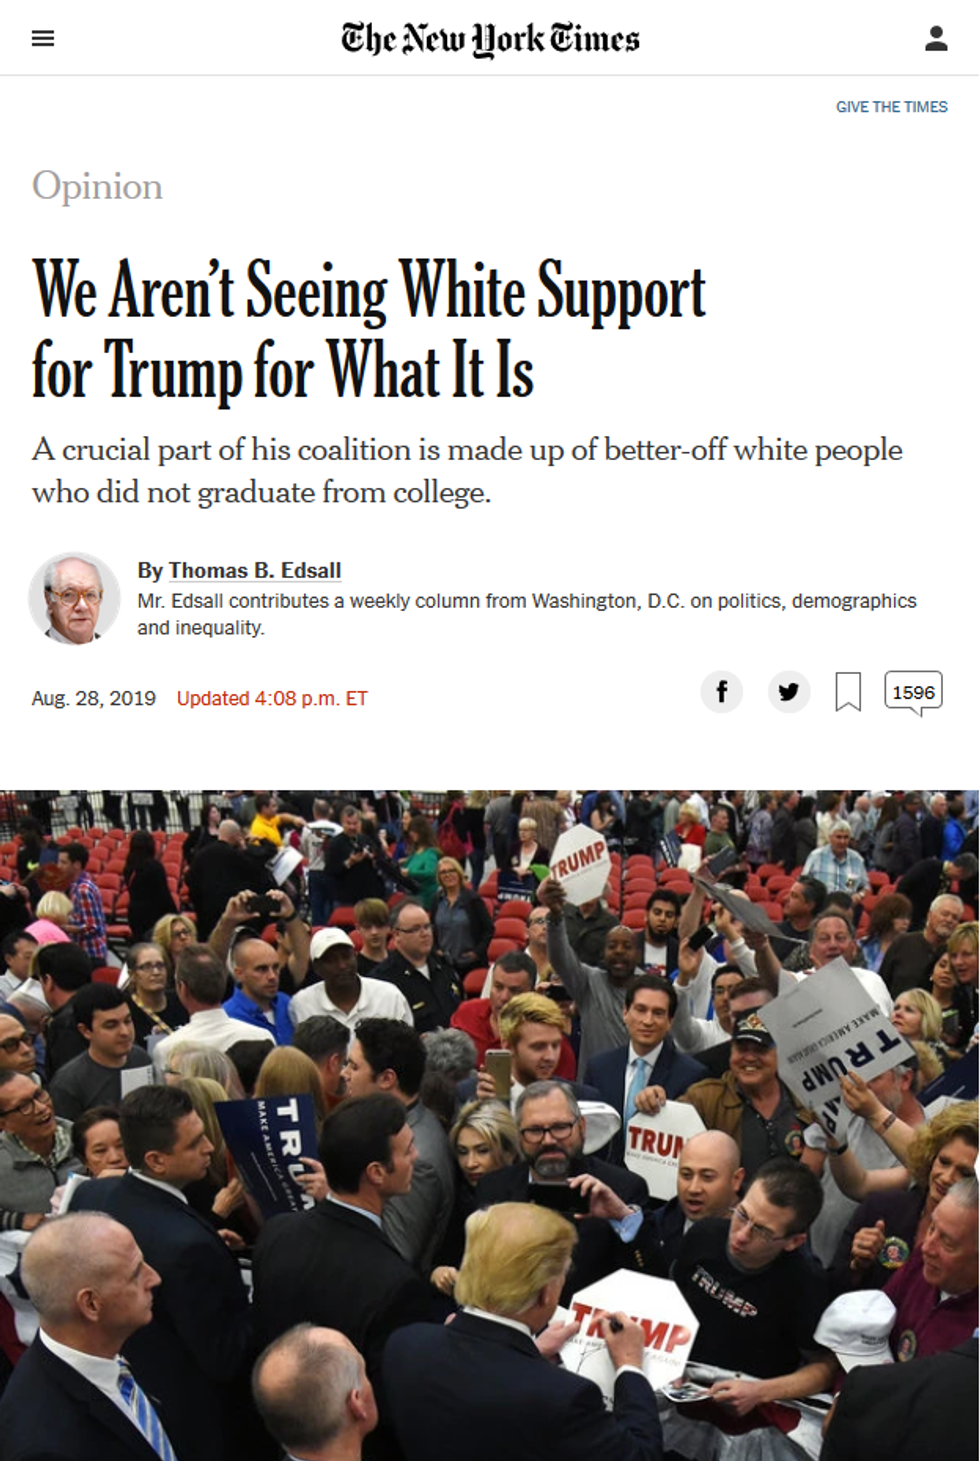 NYT: We Aren't Seeing White Support for Trump for What It Is